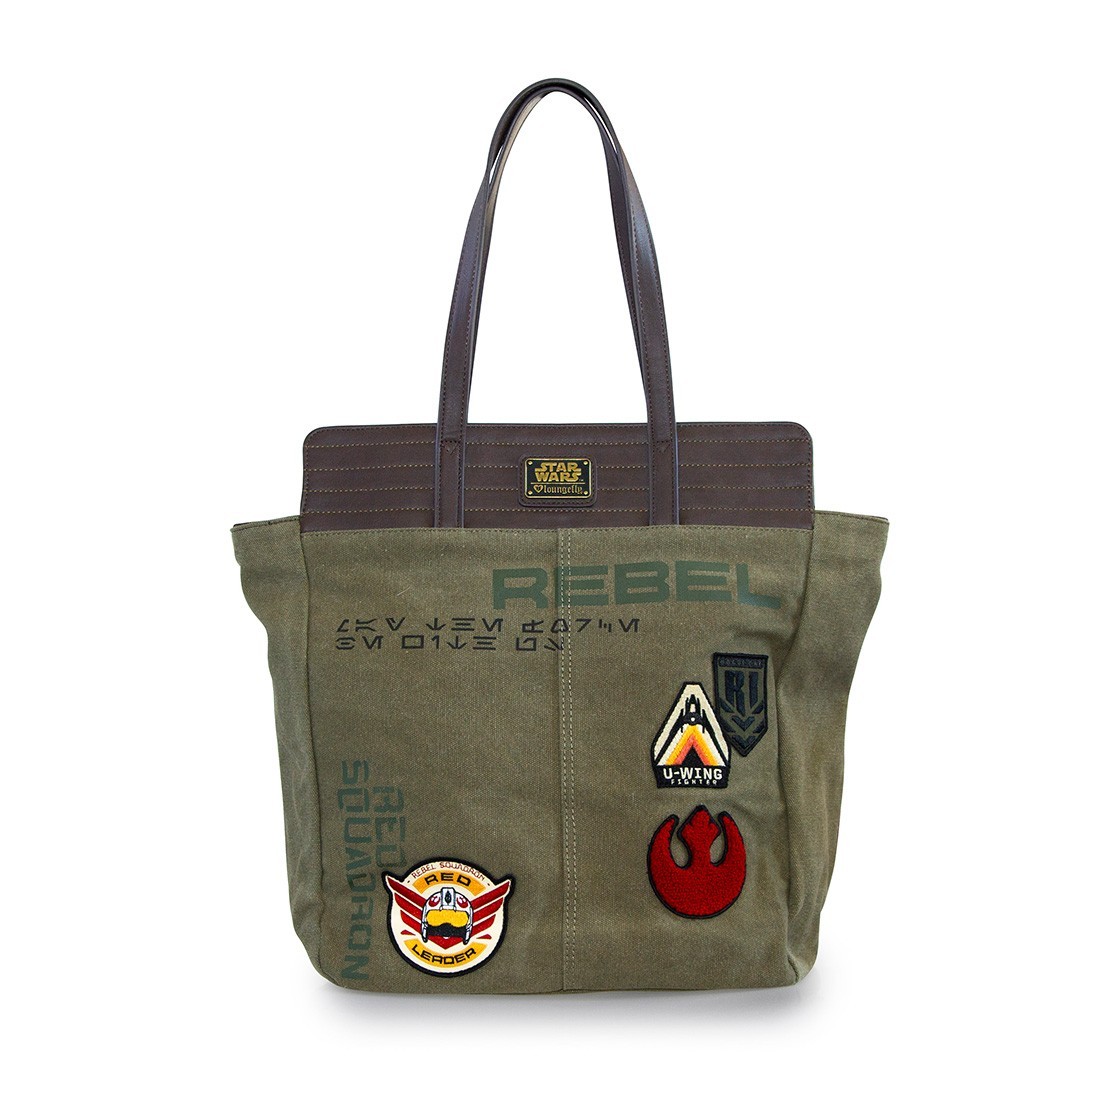 New Loungefly x Rogue One range available! - The Kessel Runway